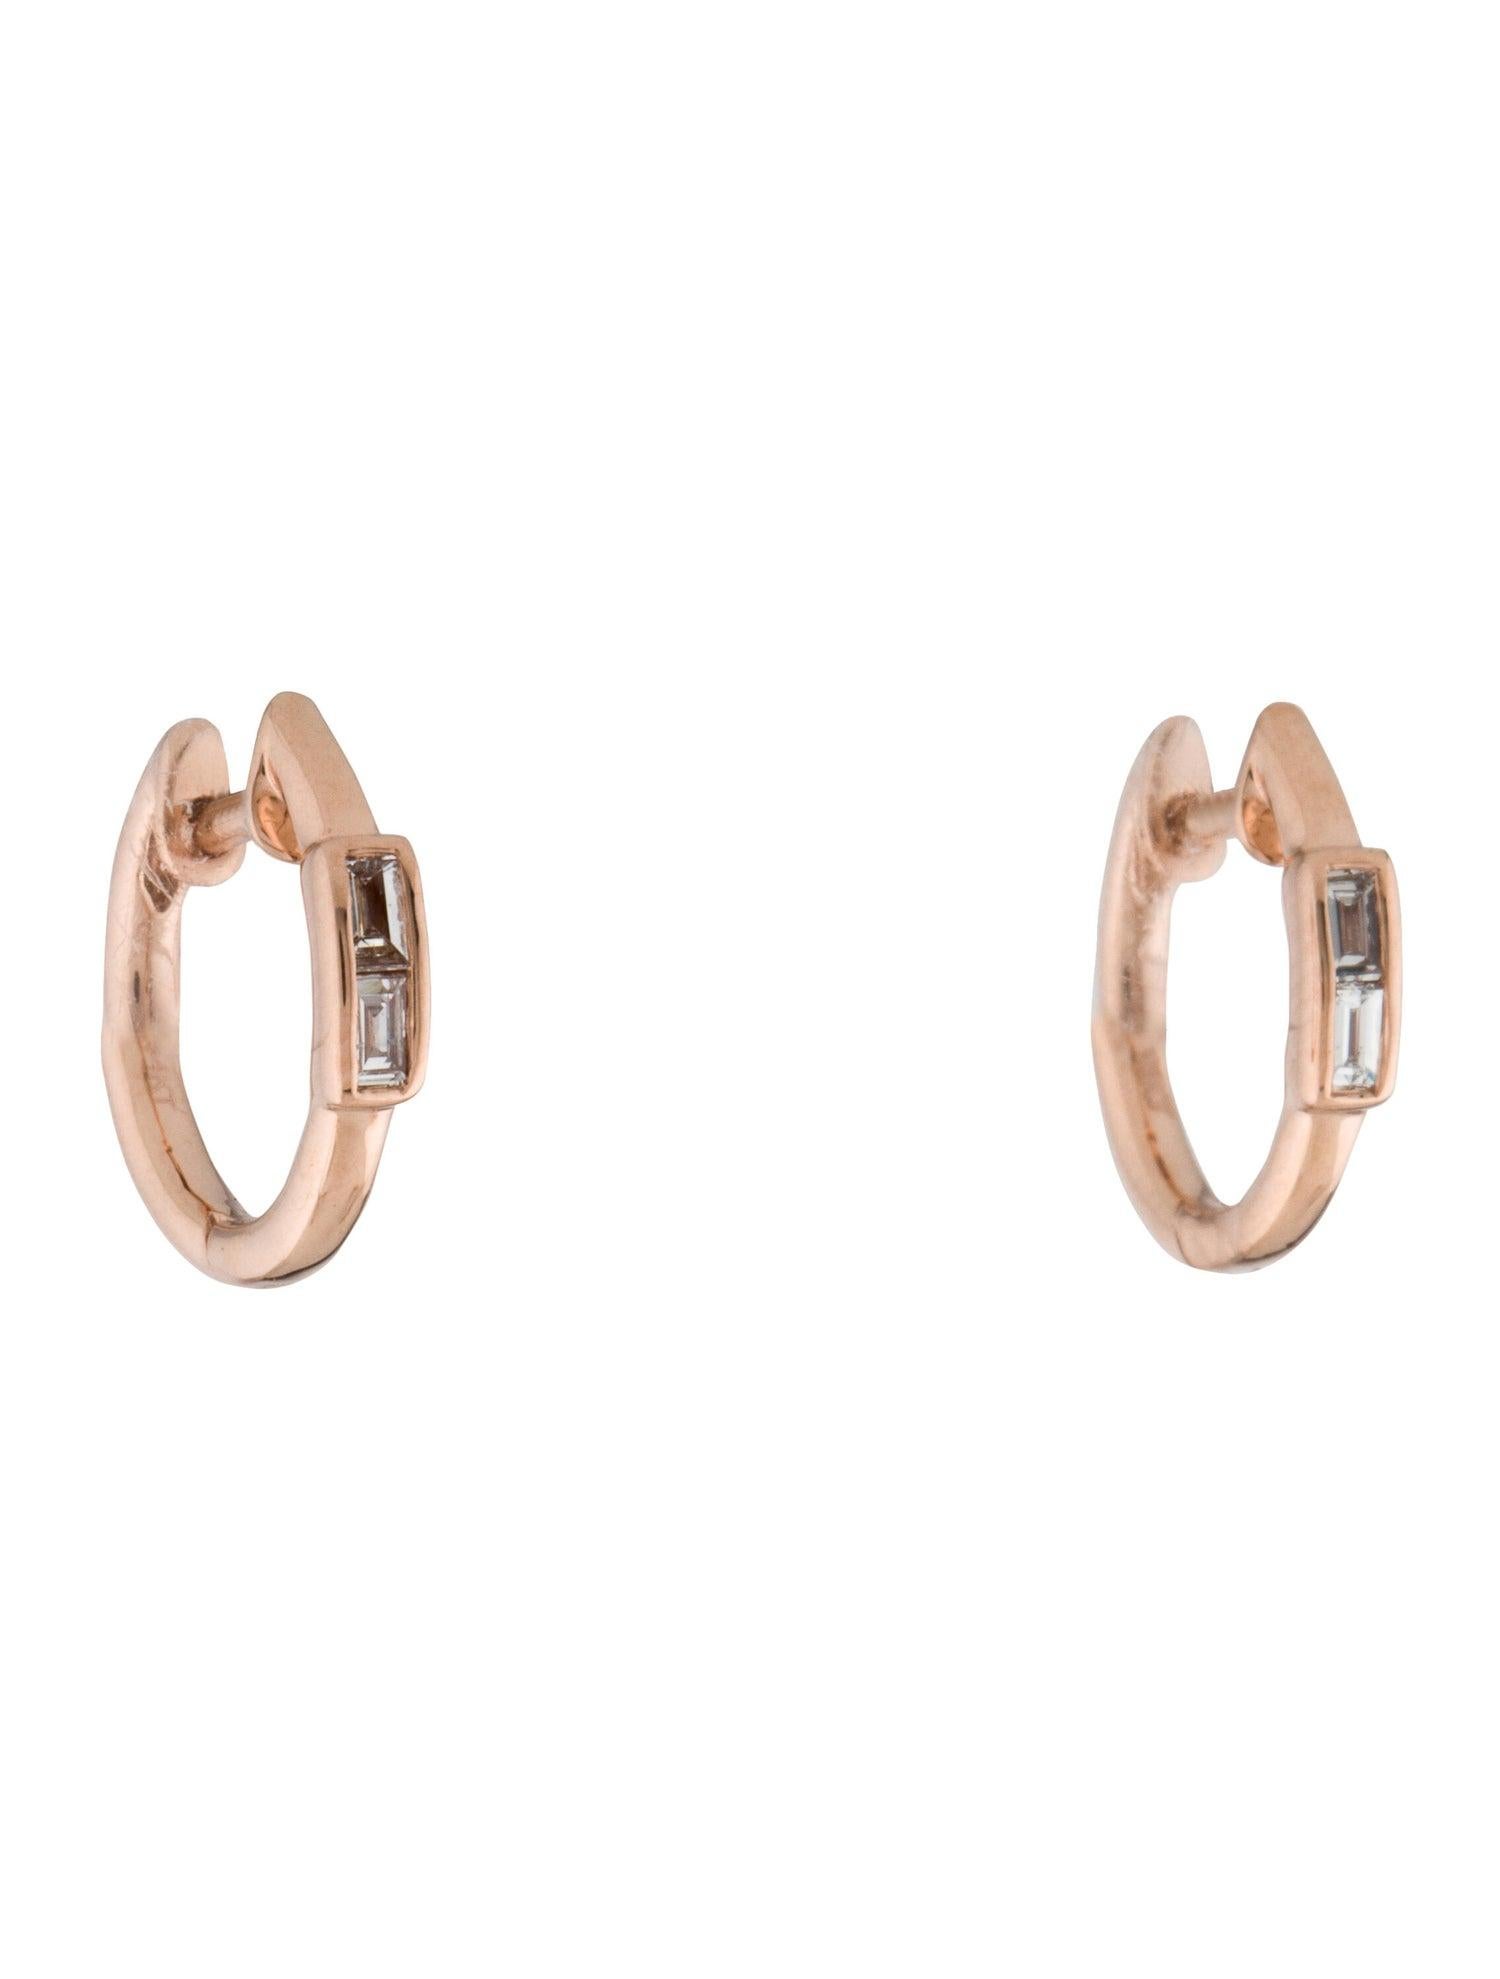 This pair of Diamond Huggie Hoop Earrings by Joelle Jewelry is sure to be your new favorite. With shimmering 0.11 ct. of baguette-cut diamonds adorning the Huggie, they create the perfect amount of sparkle for  any look. Crafted in 14k Gold with